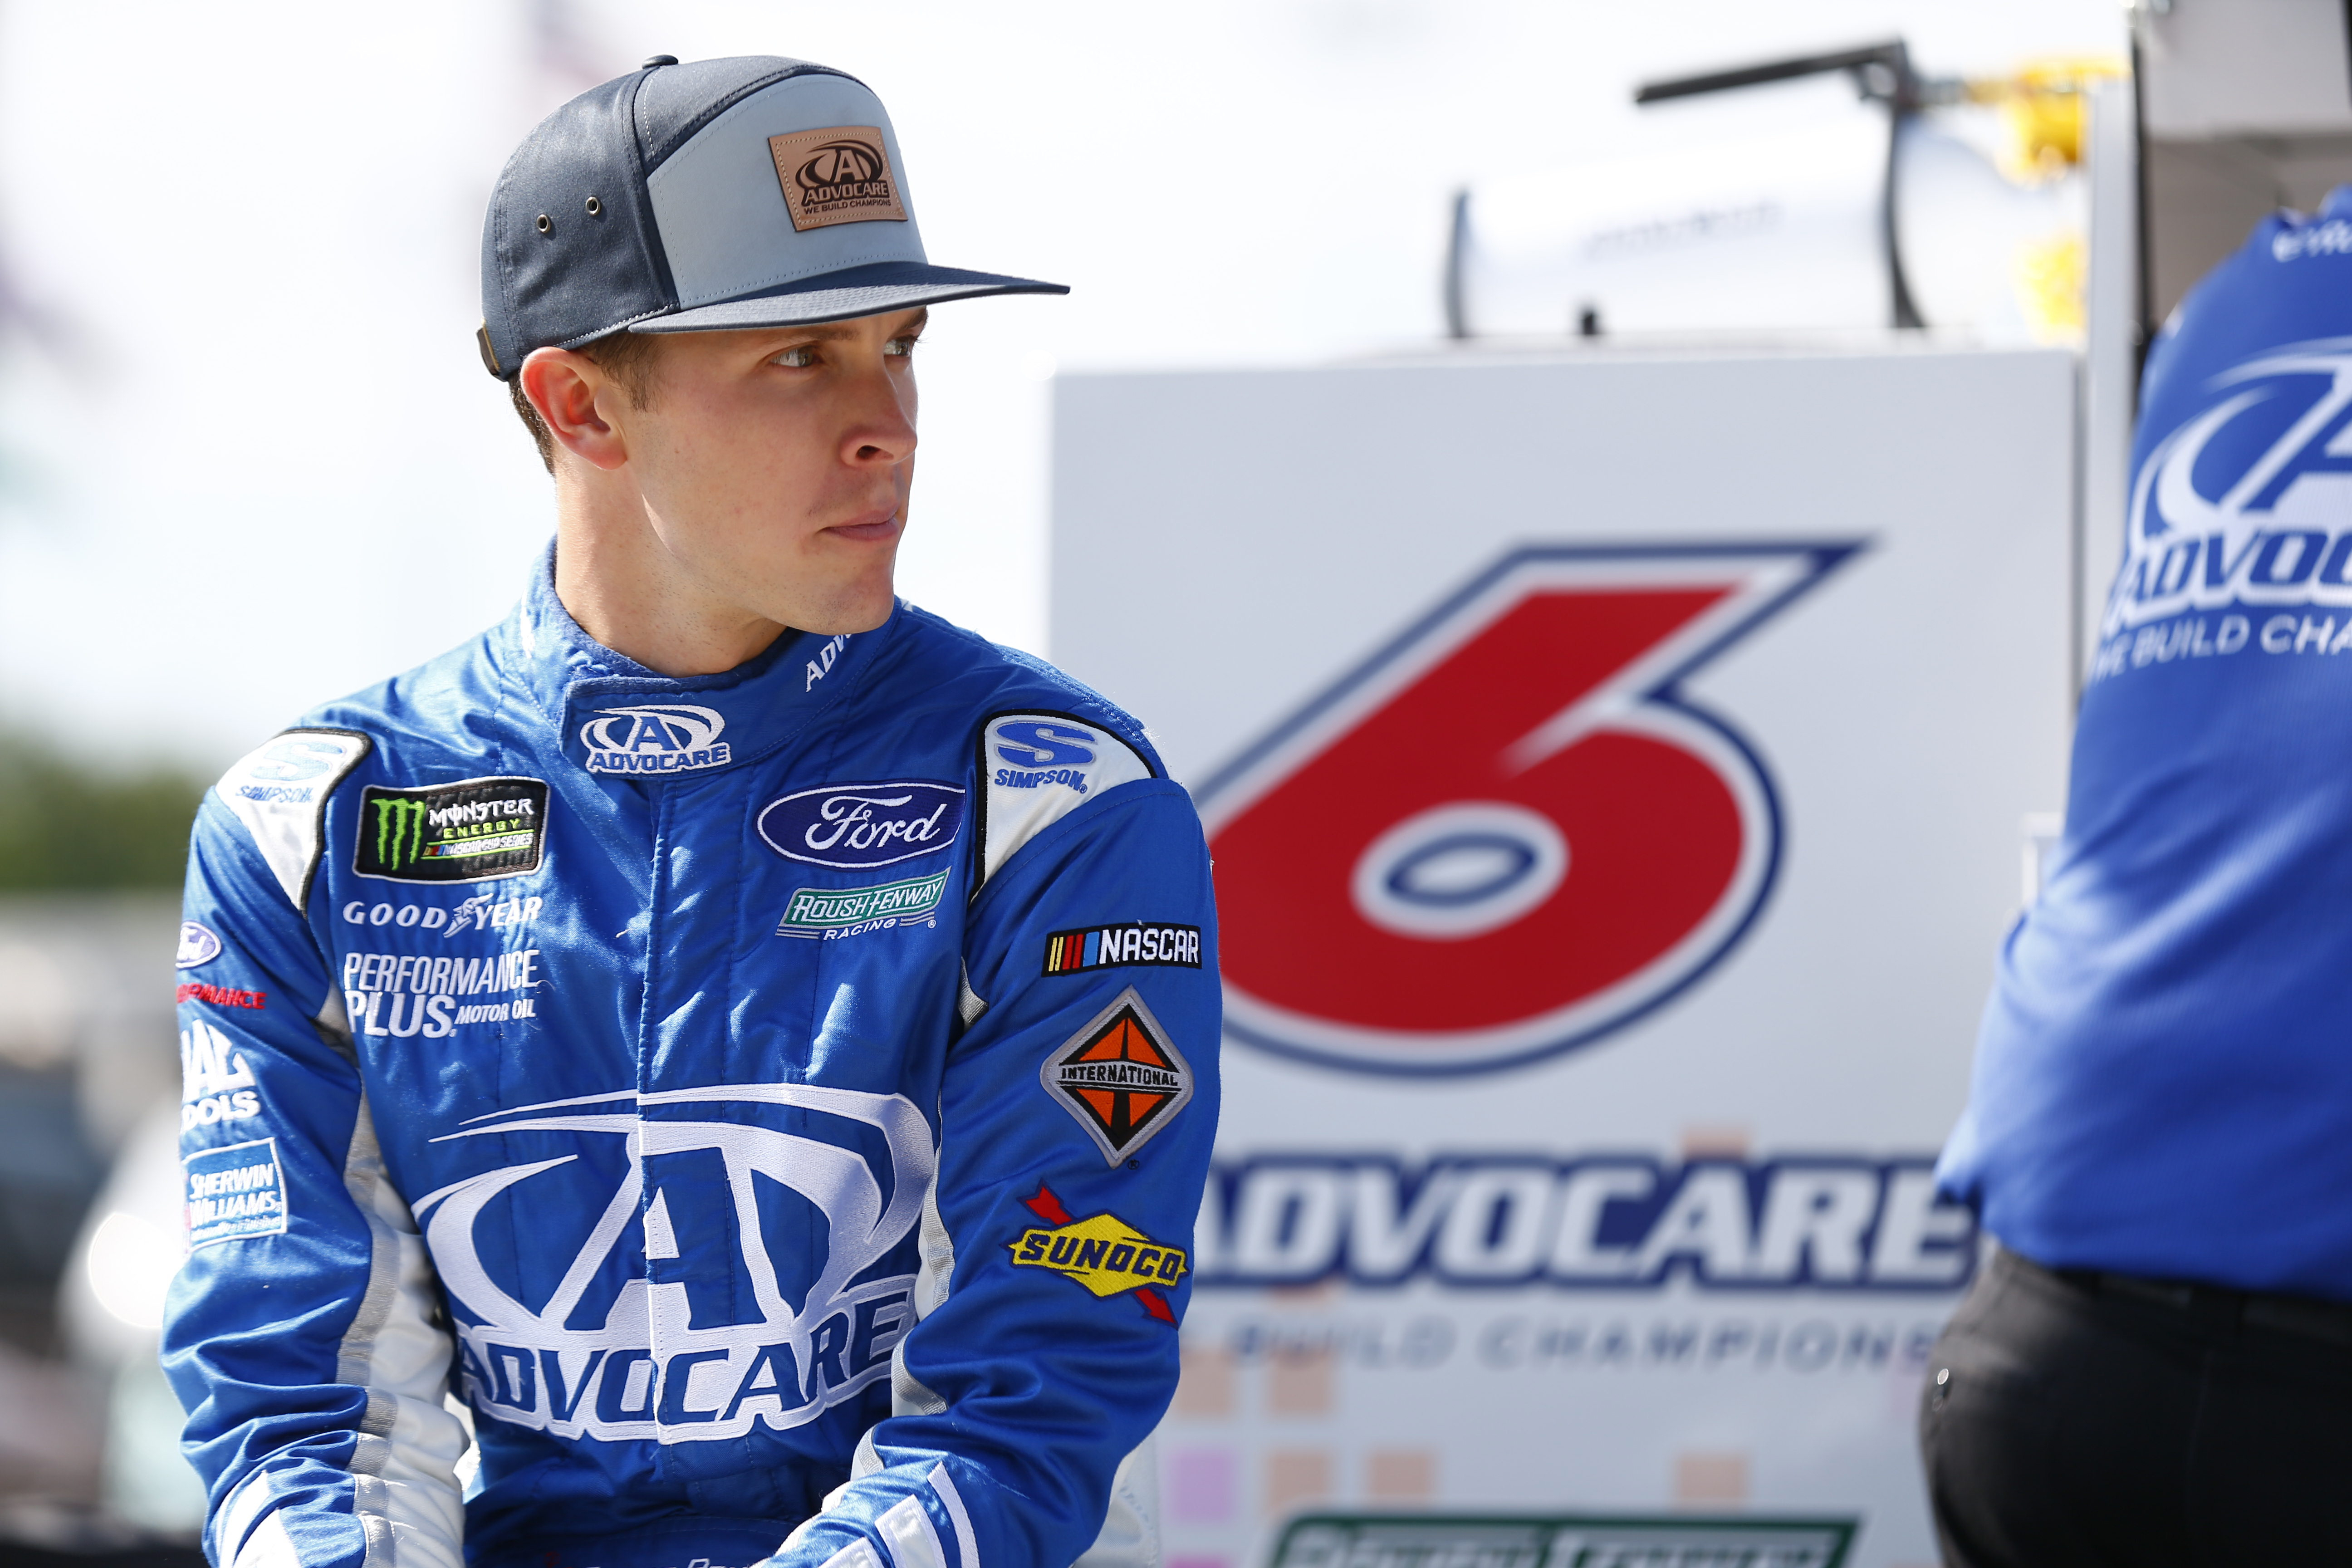 April 28, 2017 - Richmond, Virginia, USA: Trevor Bayne (6) hangs out on pit road prior to qualifying for the Toyota Owners 400 at Richmond International Speedway in Richmond, Virginia.